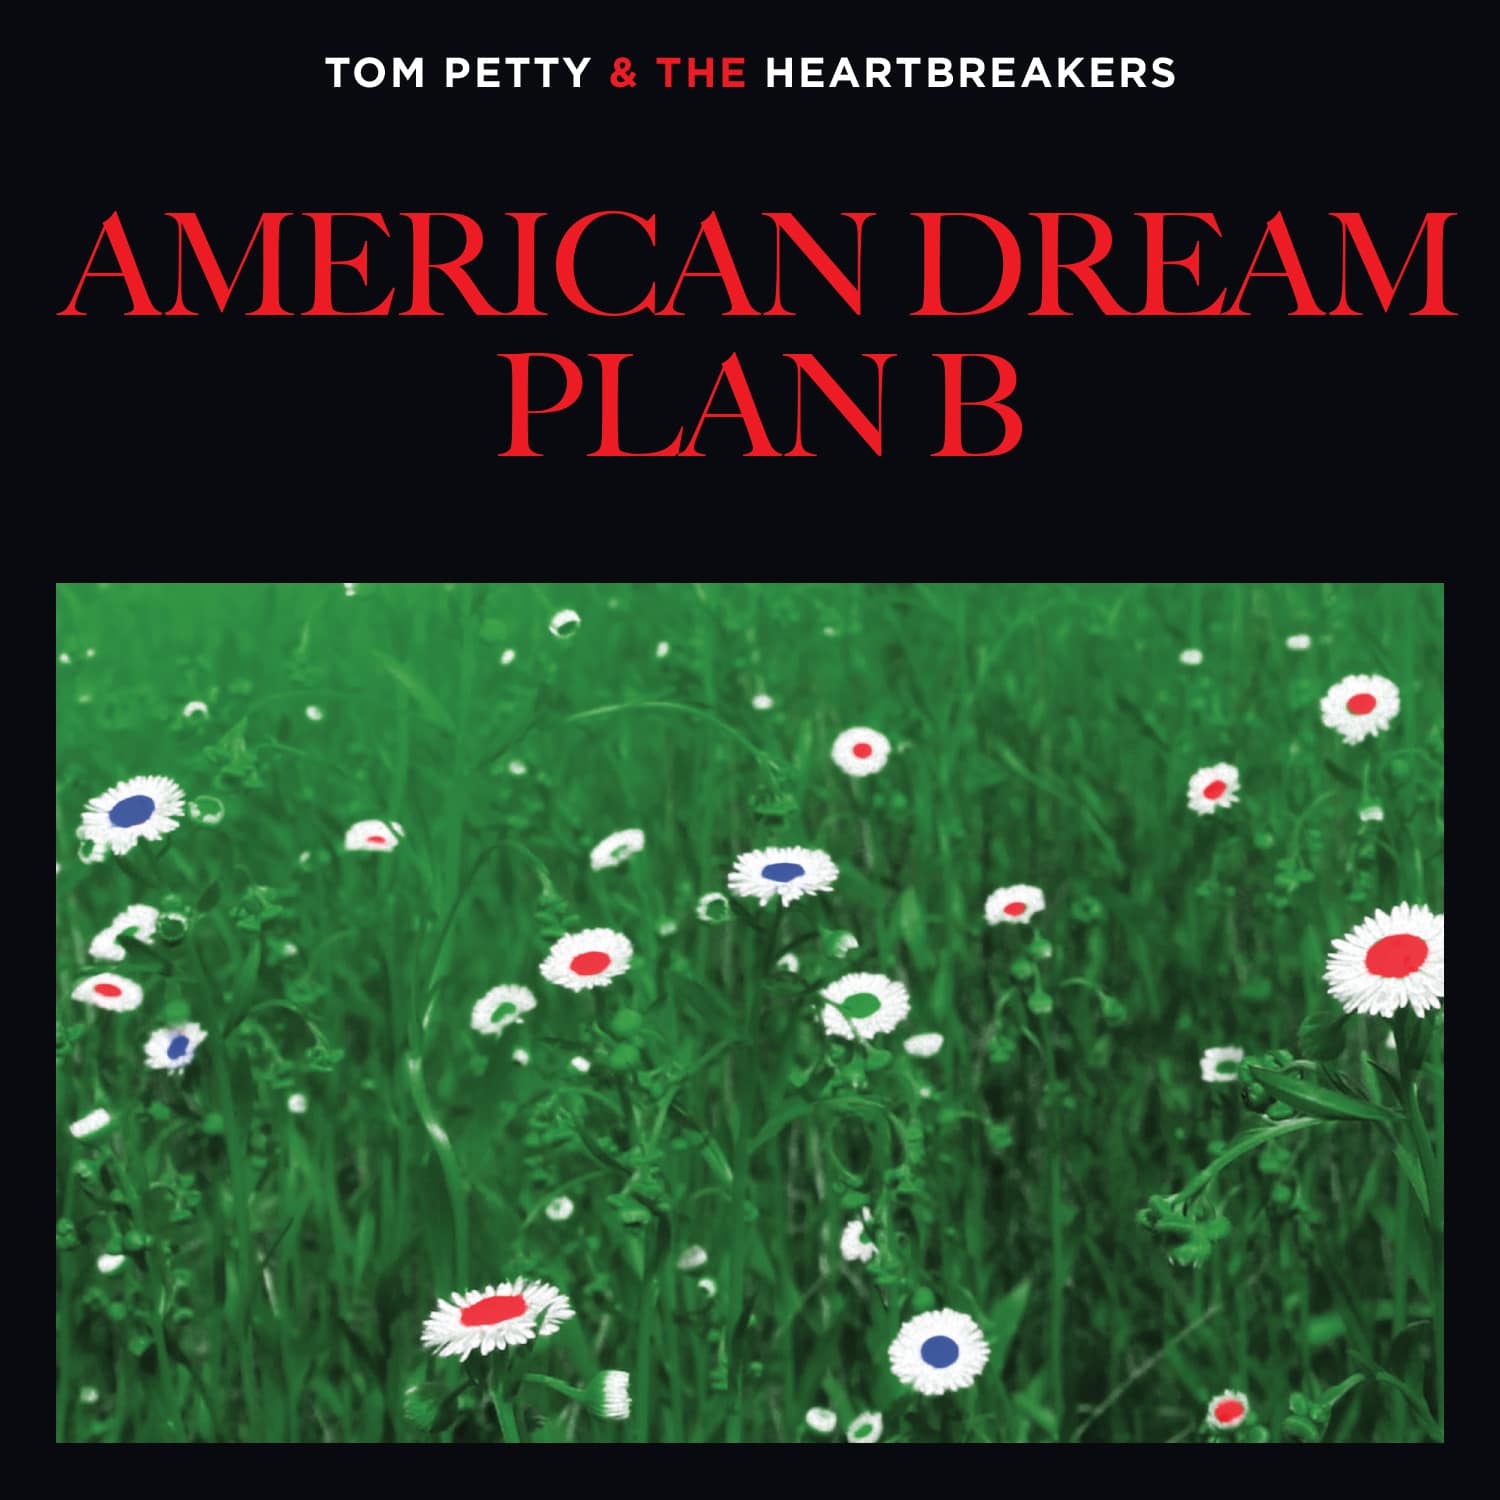 Track Review: Tom Petty and the Heartbreakers, “American Dream Plan B”